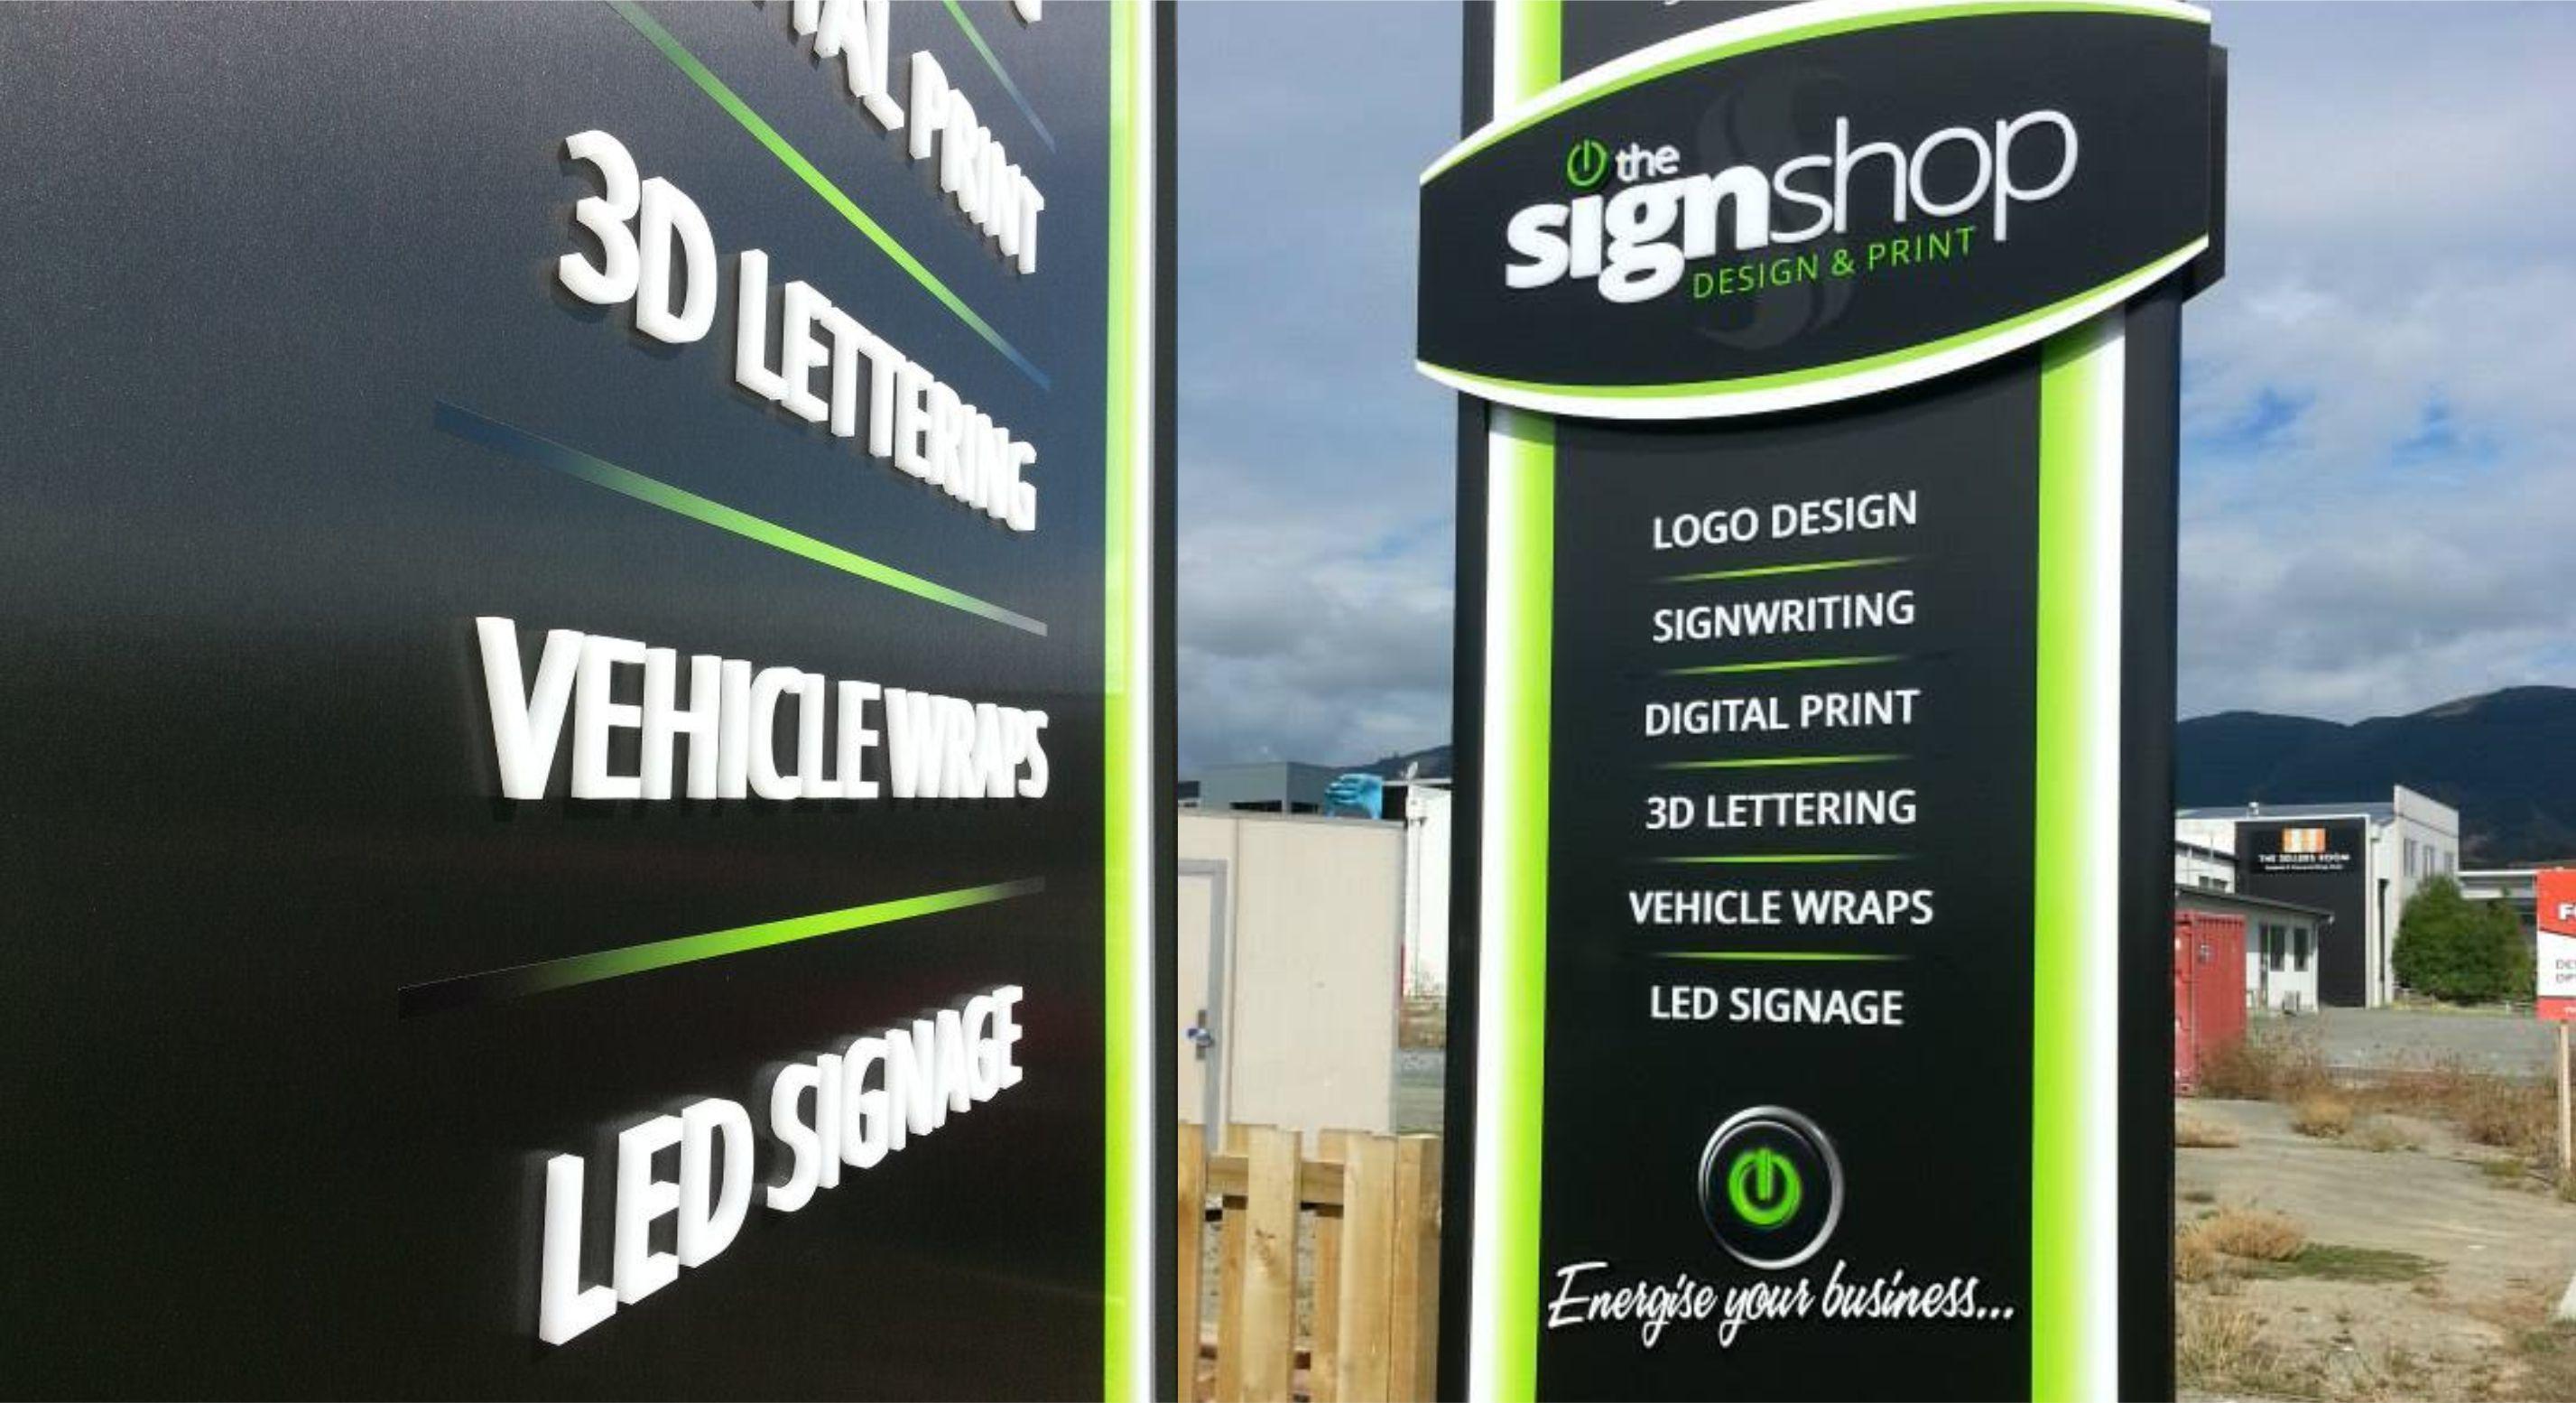 SignShop Logo - Services - The Signshop Nelson